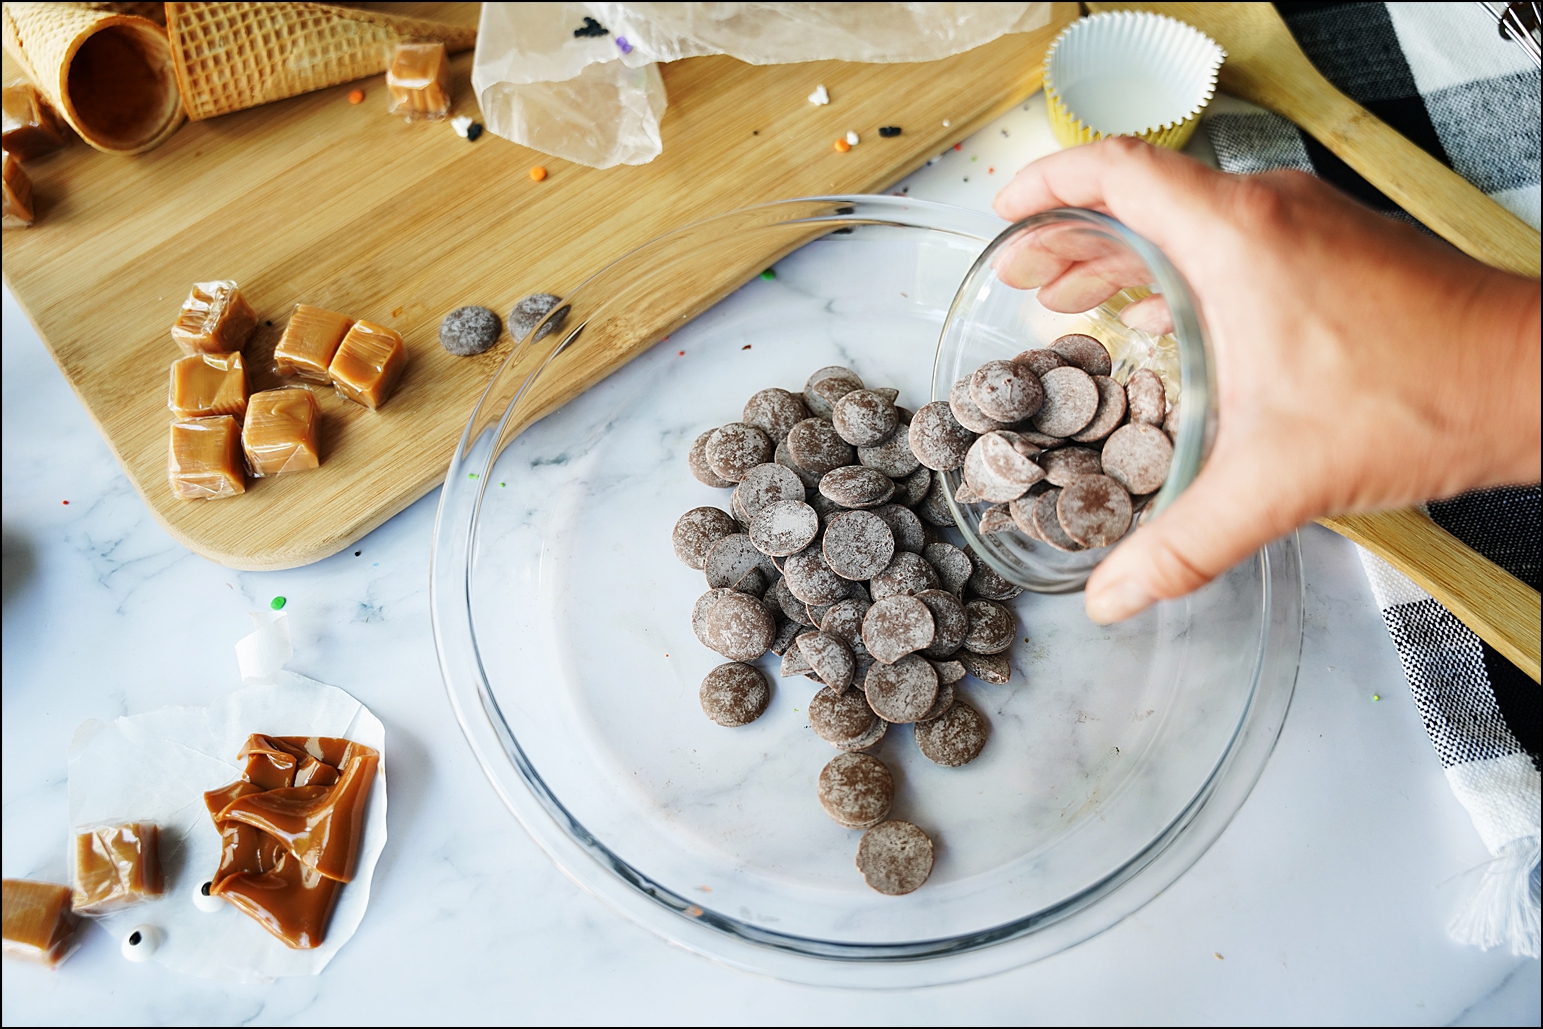 Melt the chocolate and shortening in 30-second intervals until melted.
